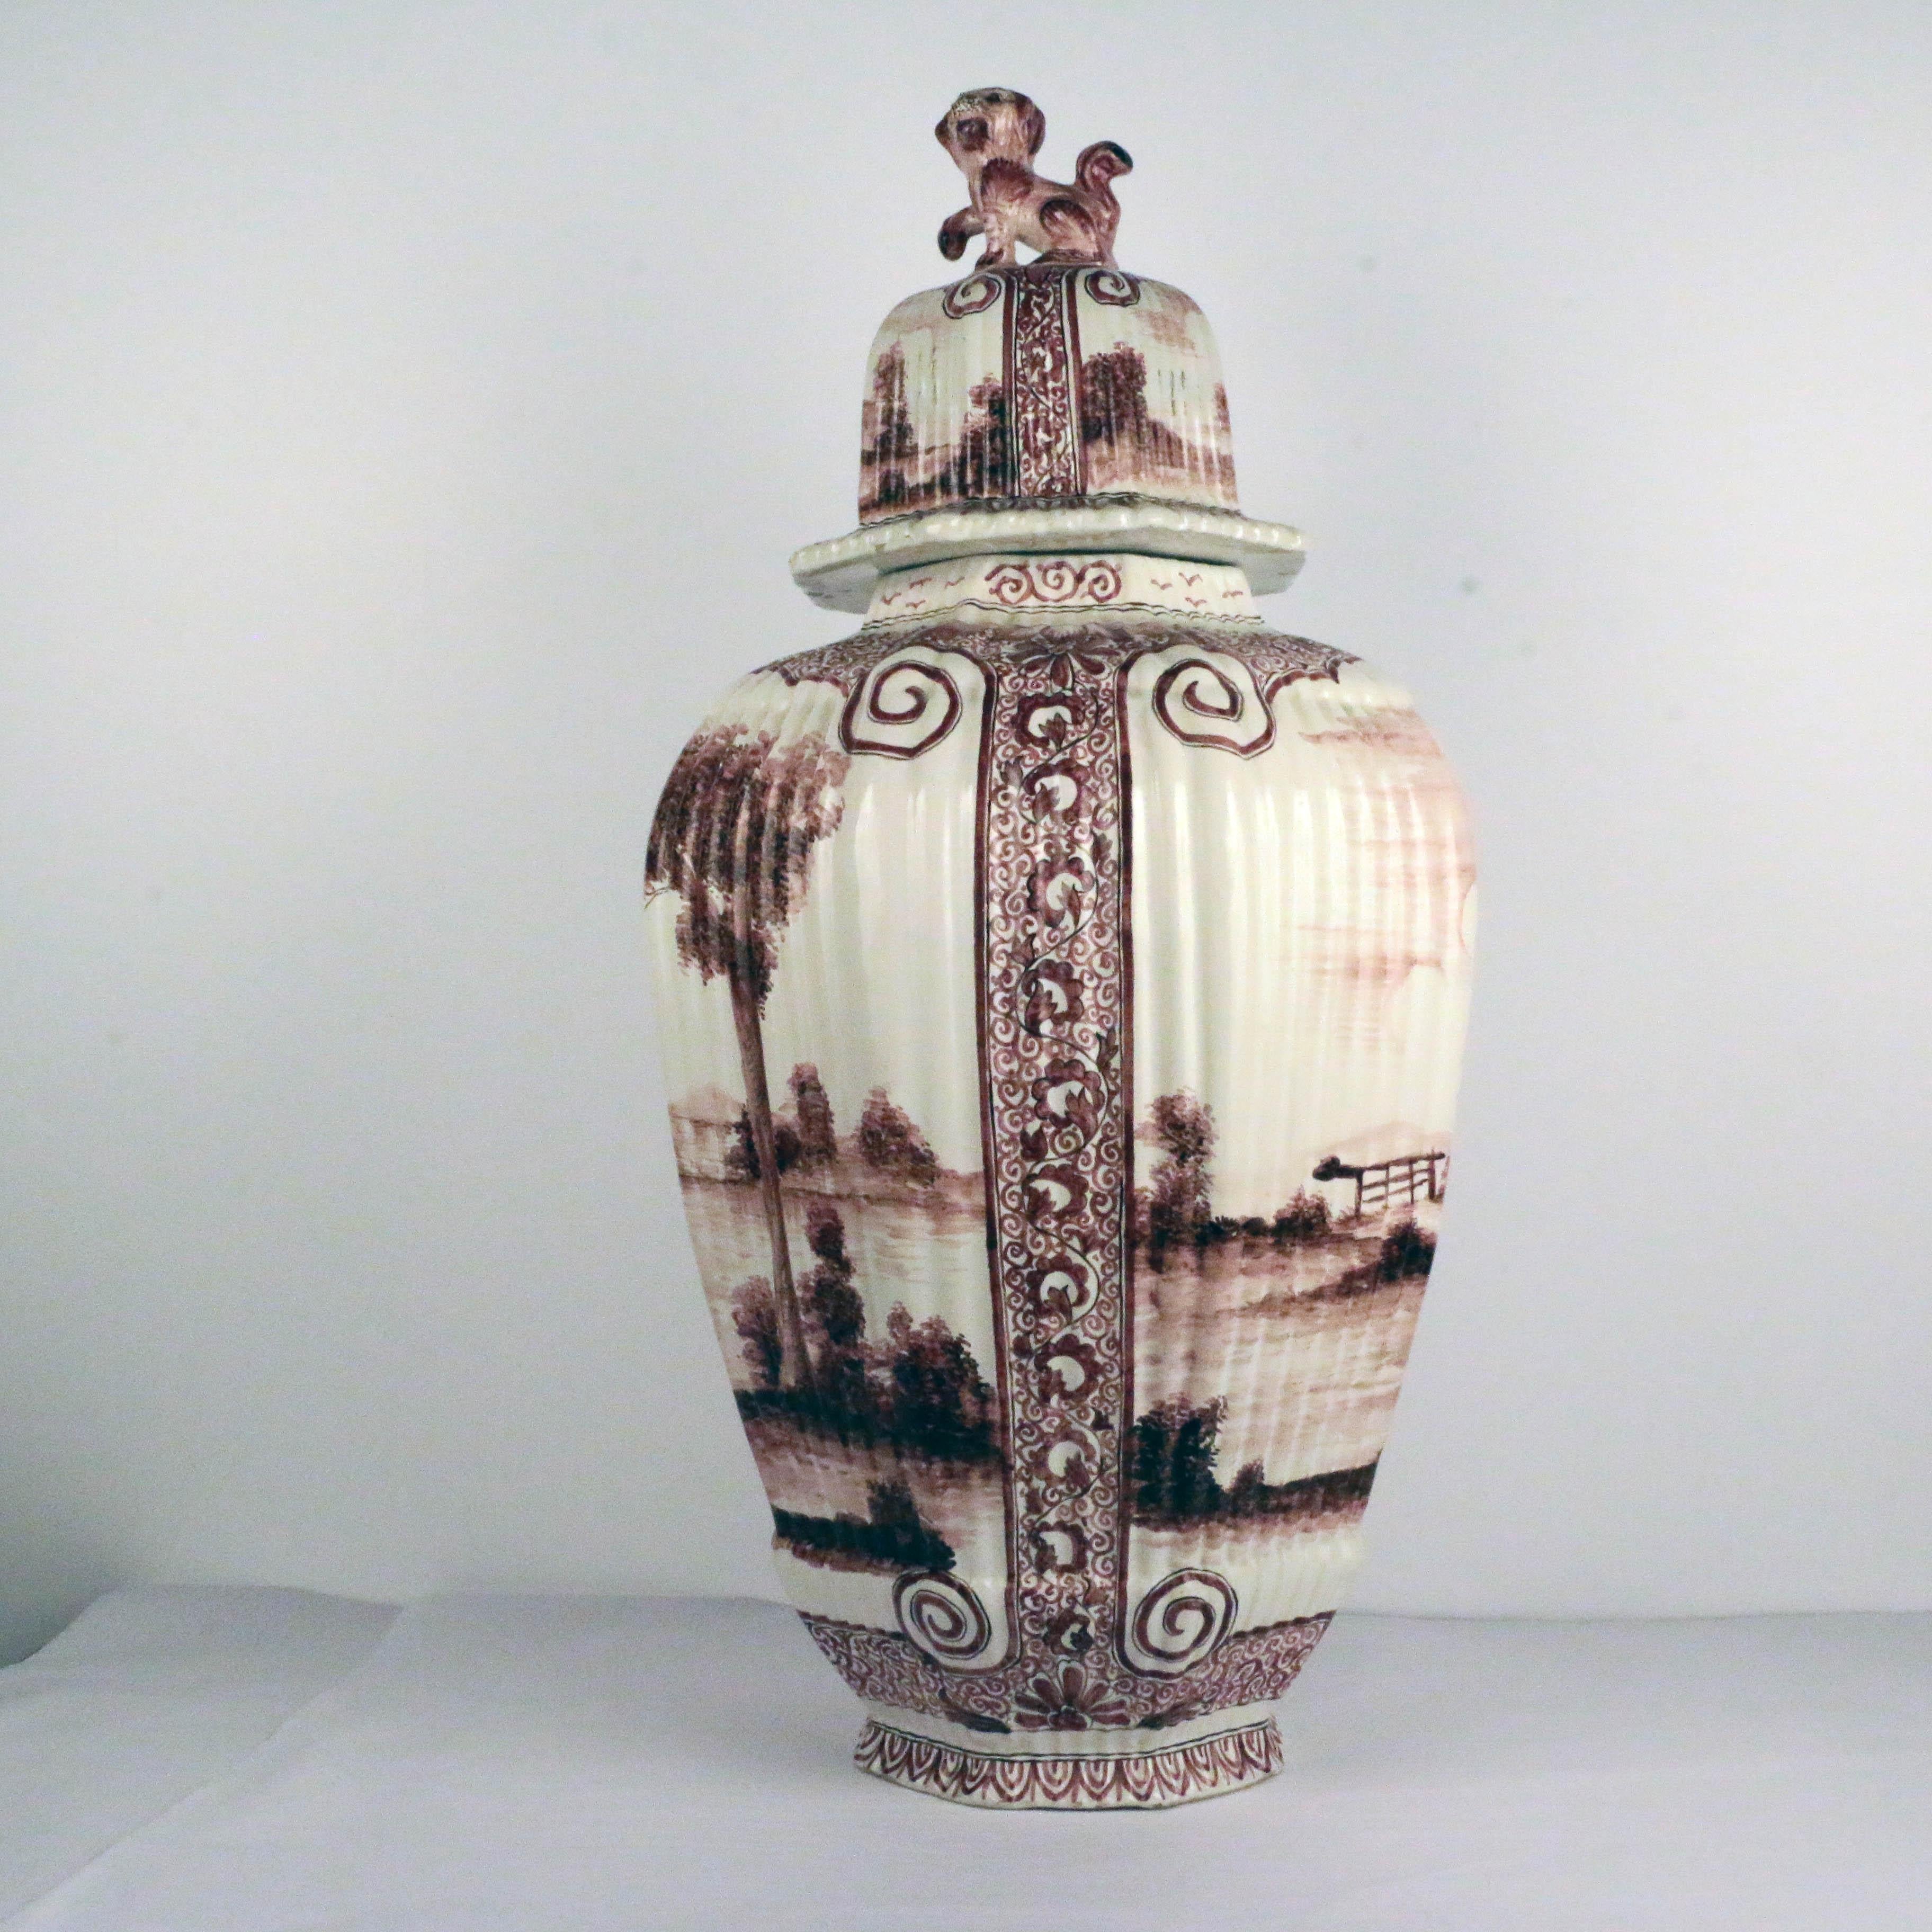 This large covered ginger jar is of tapering octagonal form. Each panel is ribbed and the whole is freely hand-painted in manganese with extensive bucolic landscapes within stylized floral borders. The cover, which continues the motif, has a